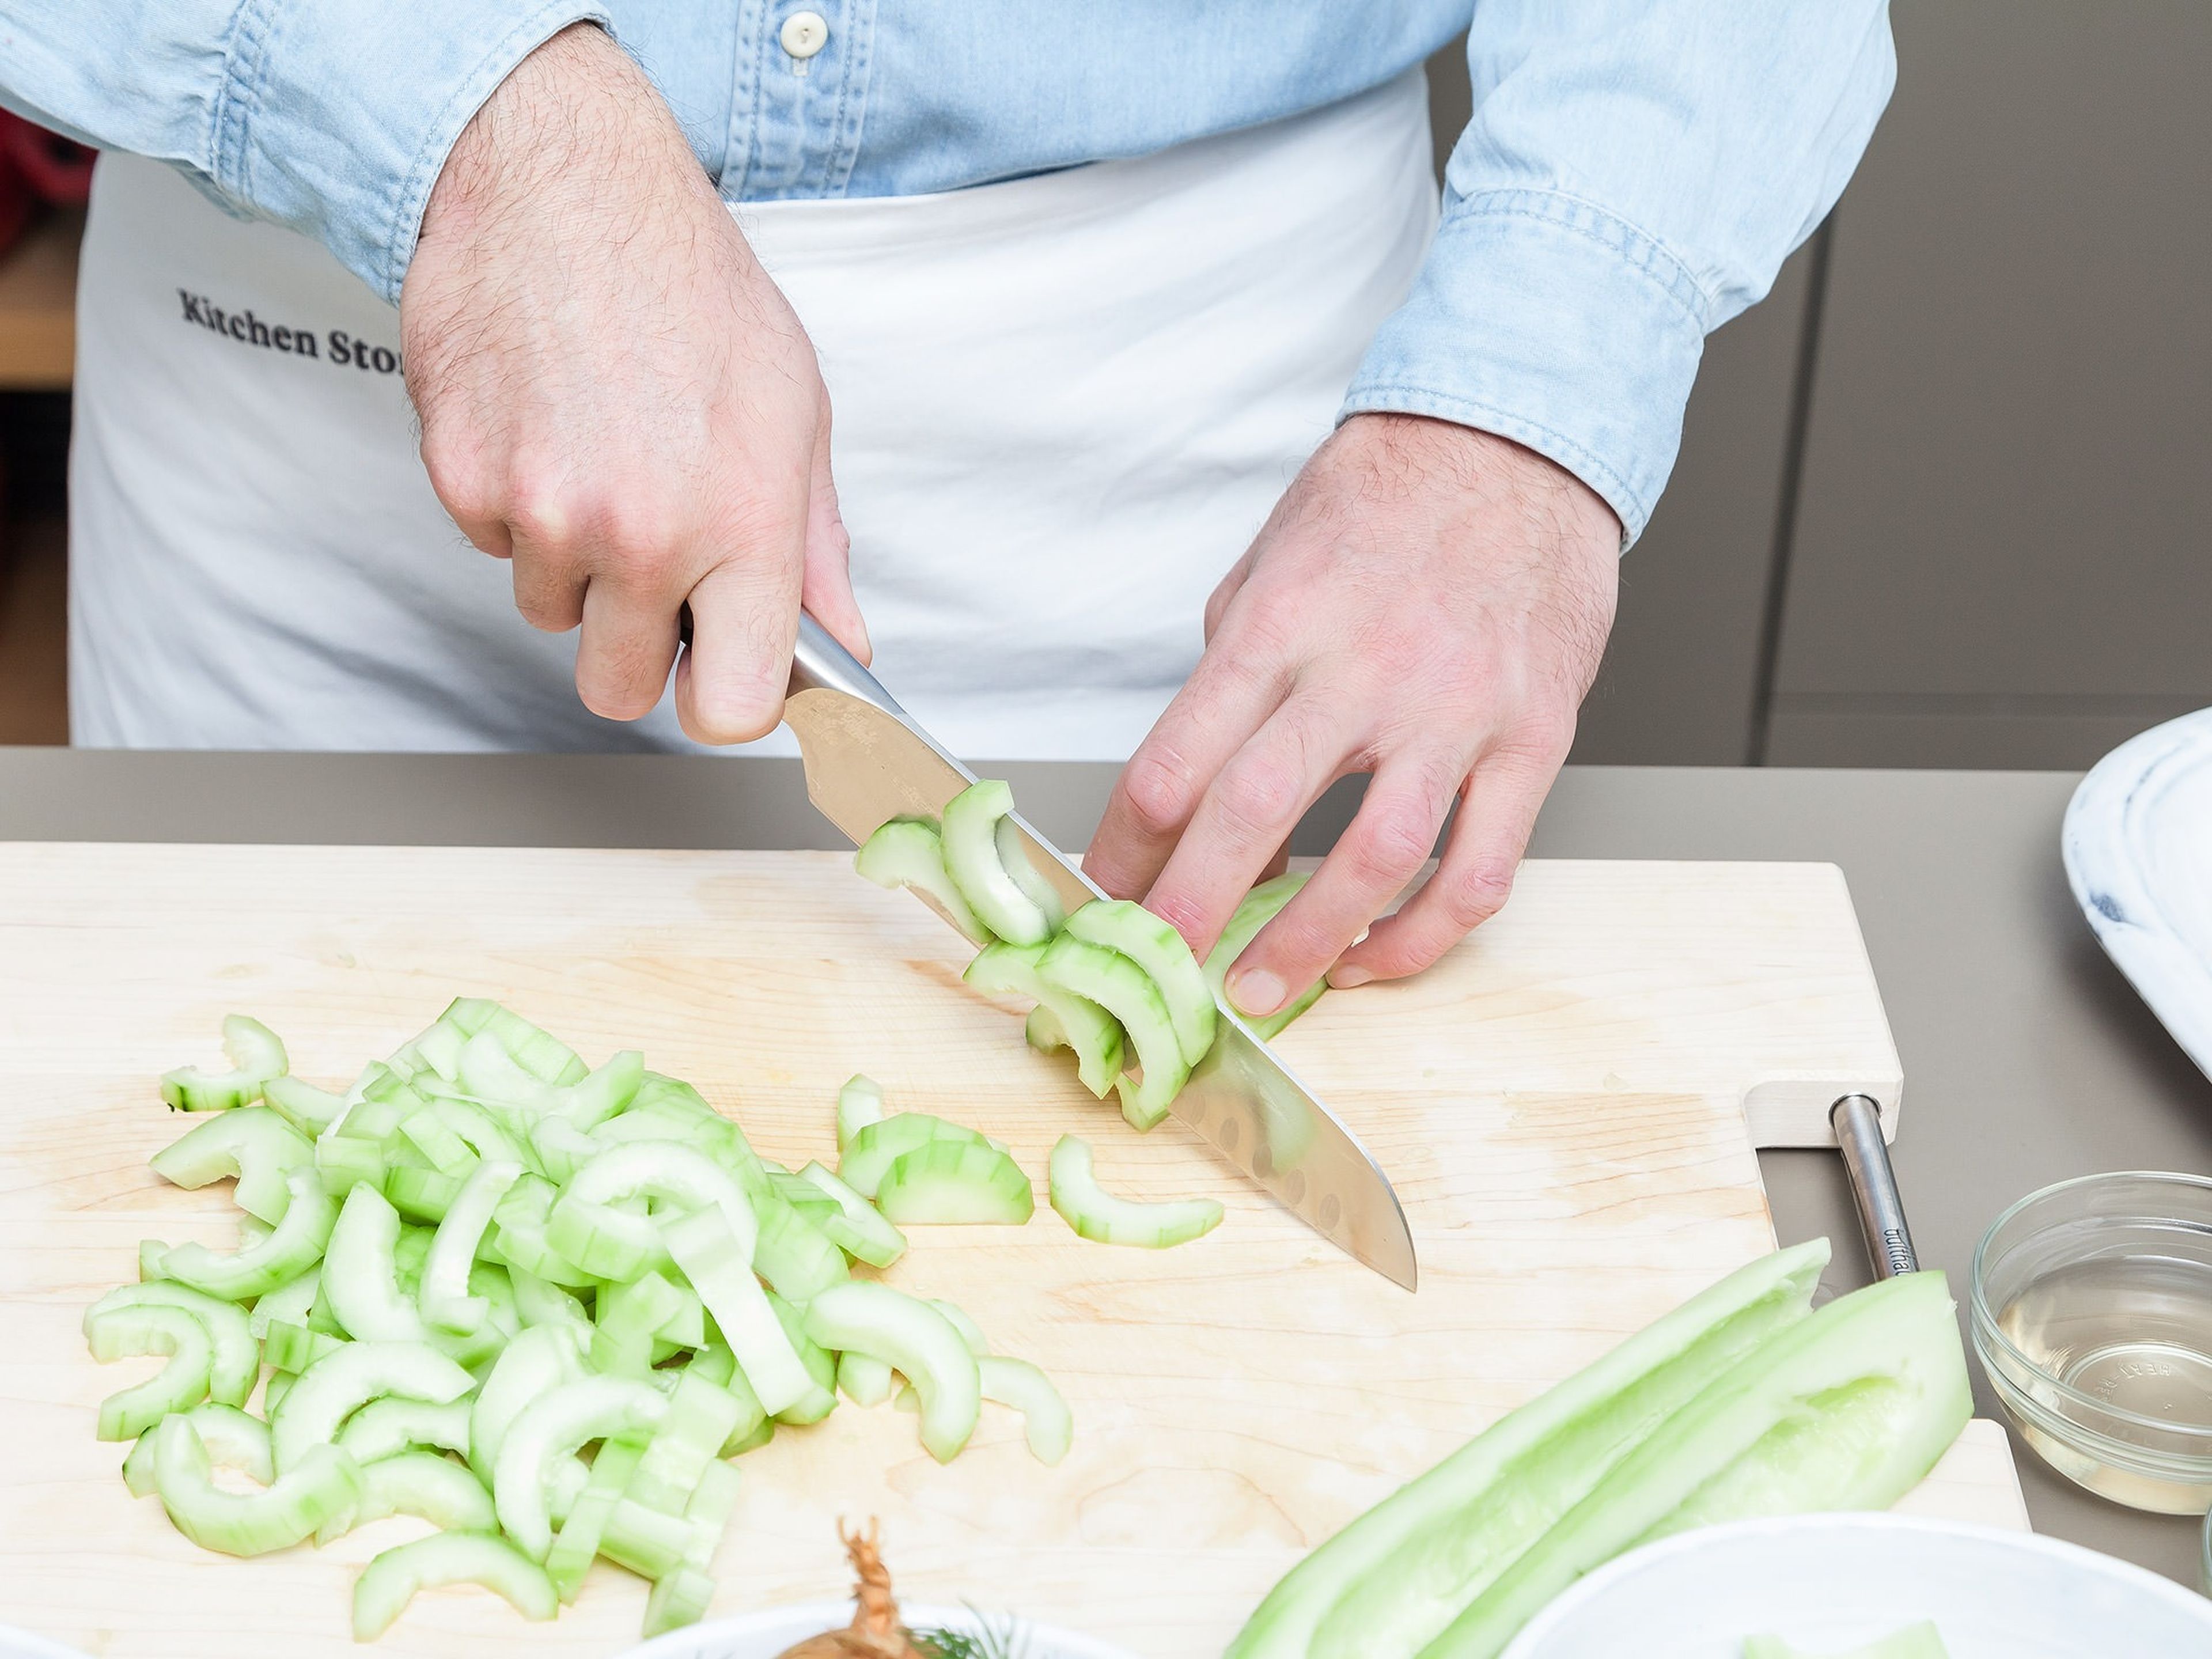 Peel cucumbers. Halve lengthwise, remove seeds with a spoon, and cut into 2 cm/0.8 in.- thick slices. Peel and finely dice potatoes. Chop dill. Peel onion and cut into thin slices.